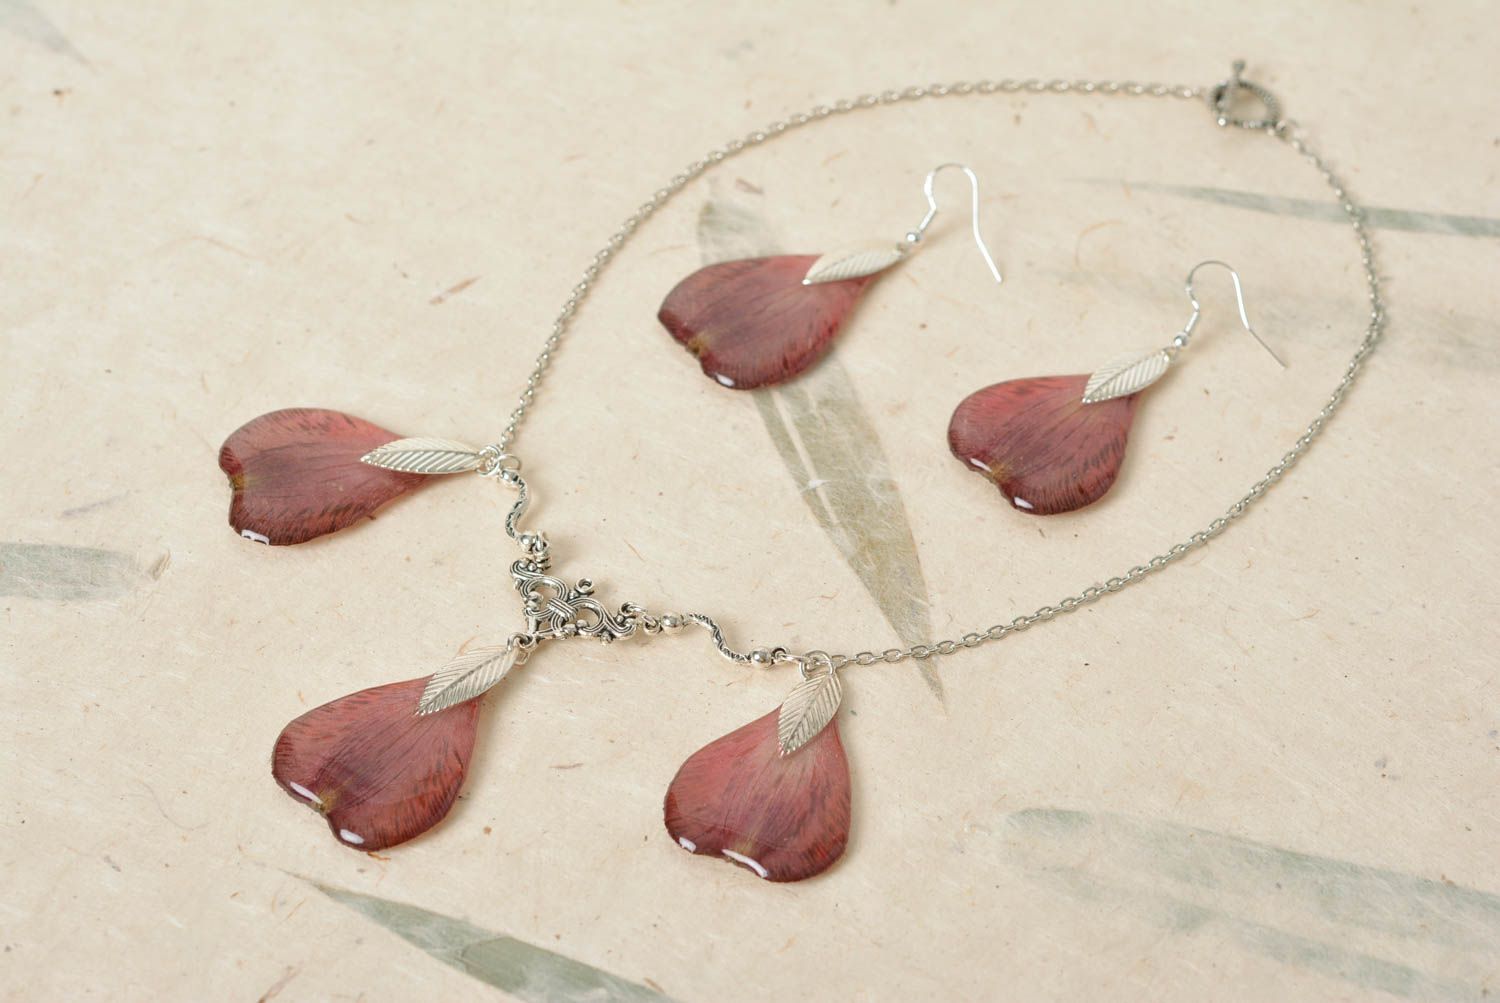 Handmade necklace and earrings with dried flowers coated with epoxy jewelry set photo 1